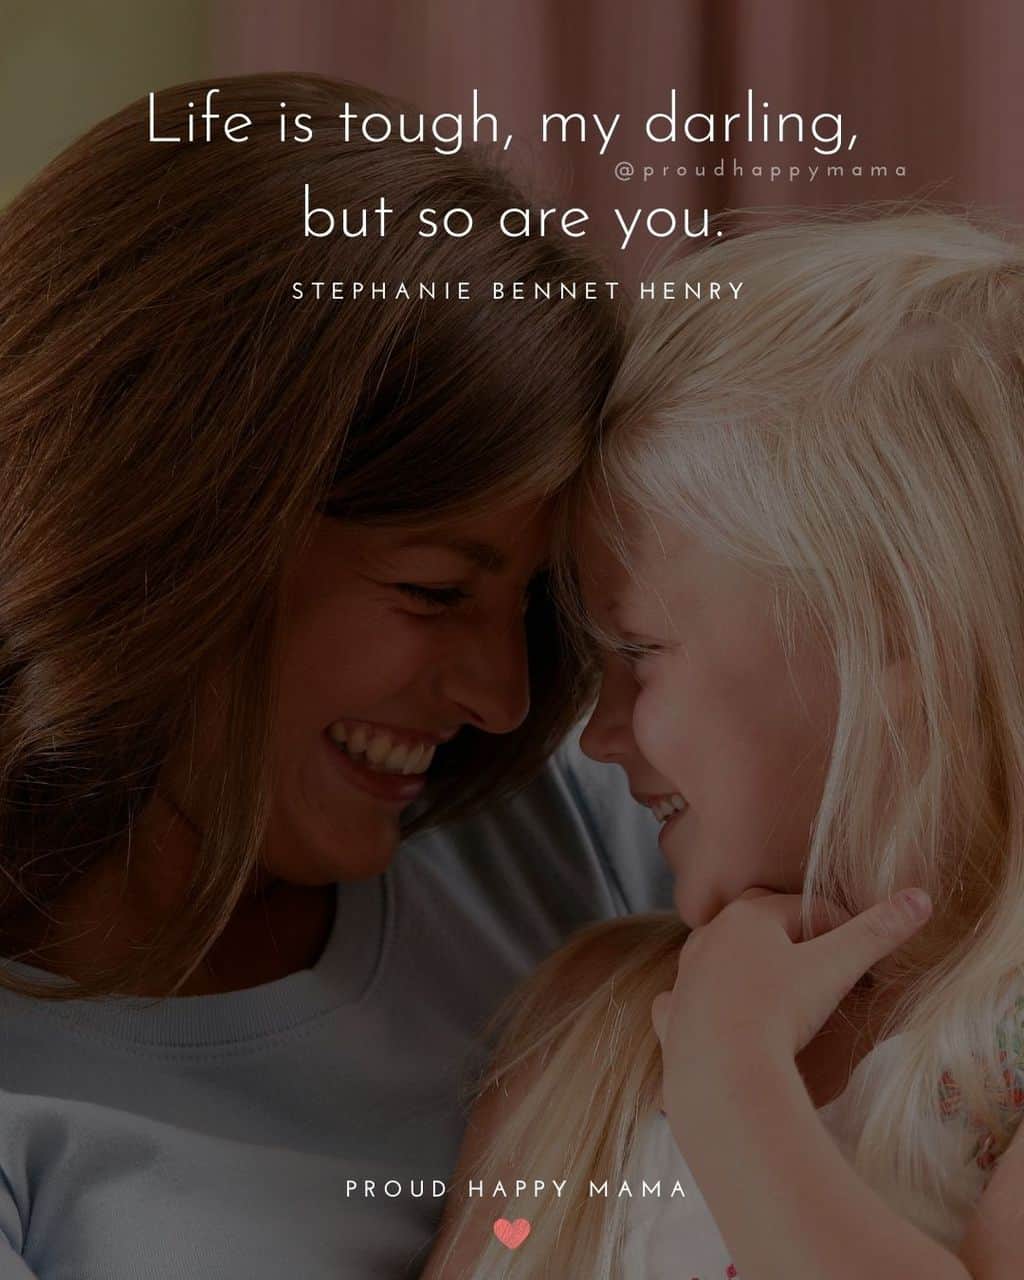 cute daughter quotes - ‘Life is tough, my darling, but so are you.’ – Stephanie Bennet Henry